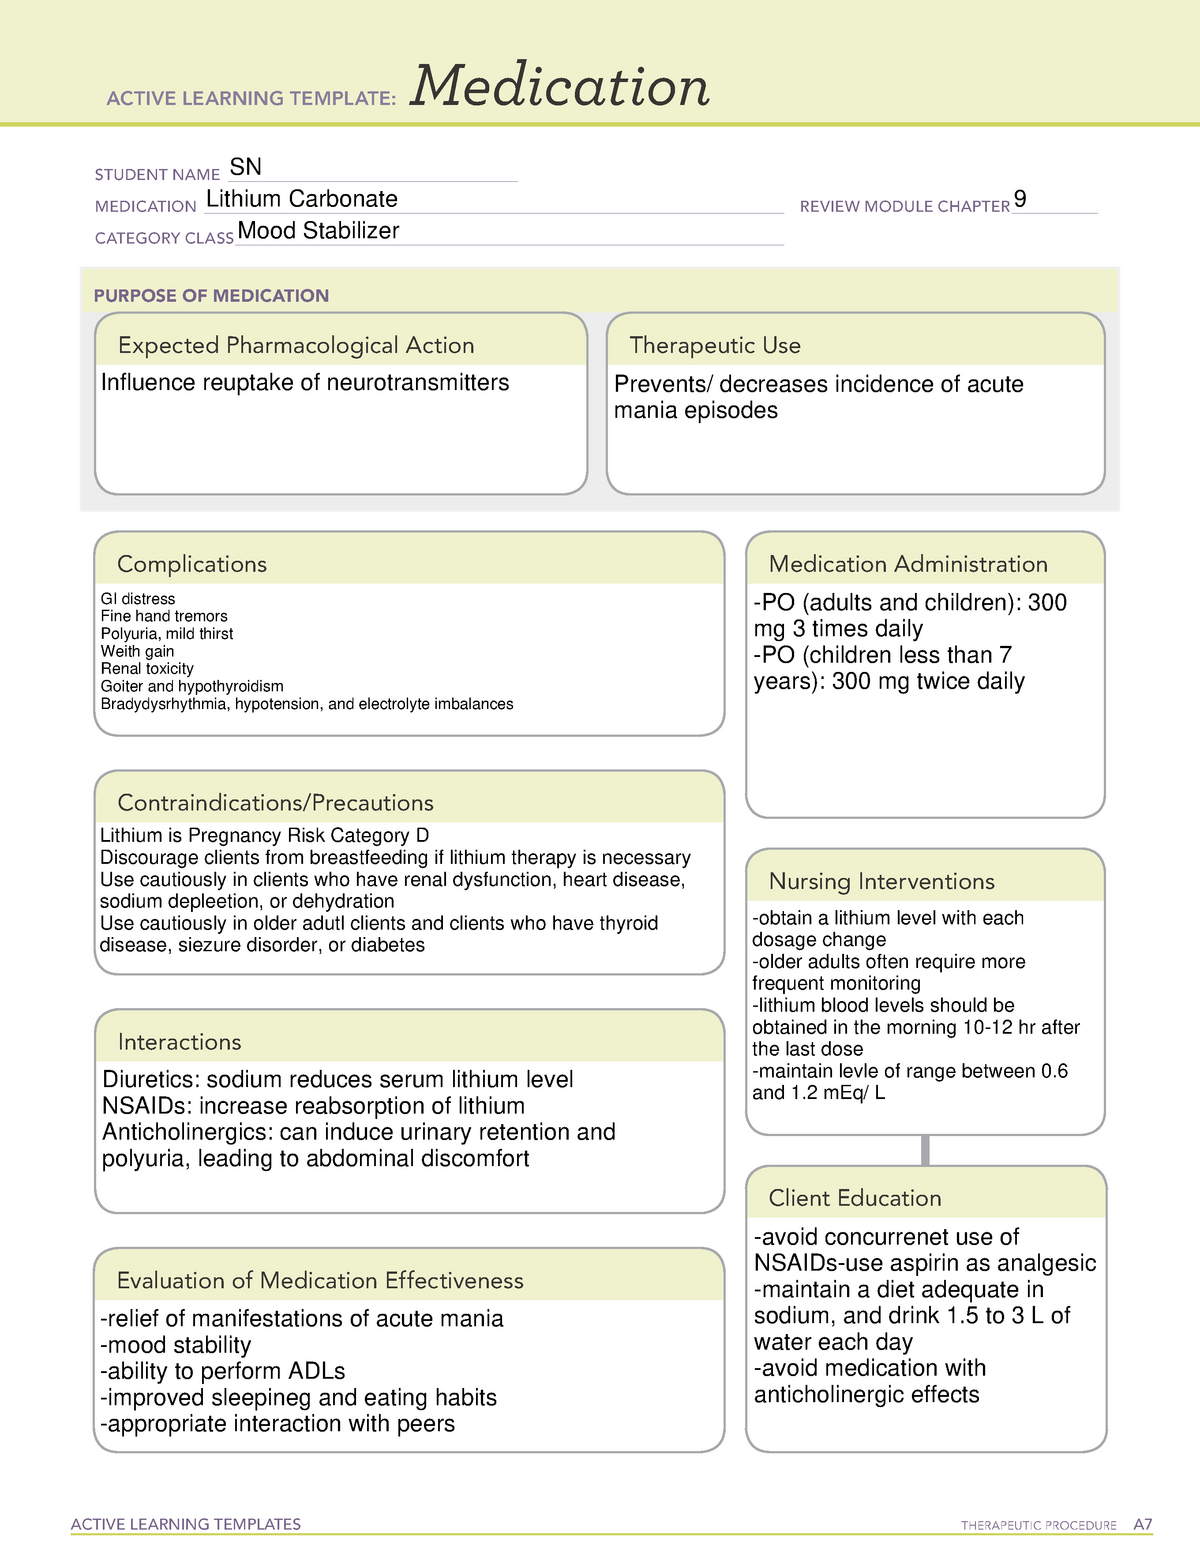 active-learning-template-medication-active-learning-templates